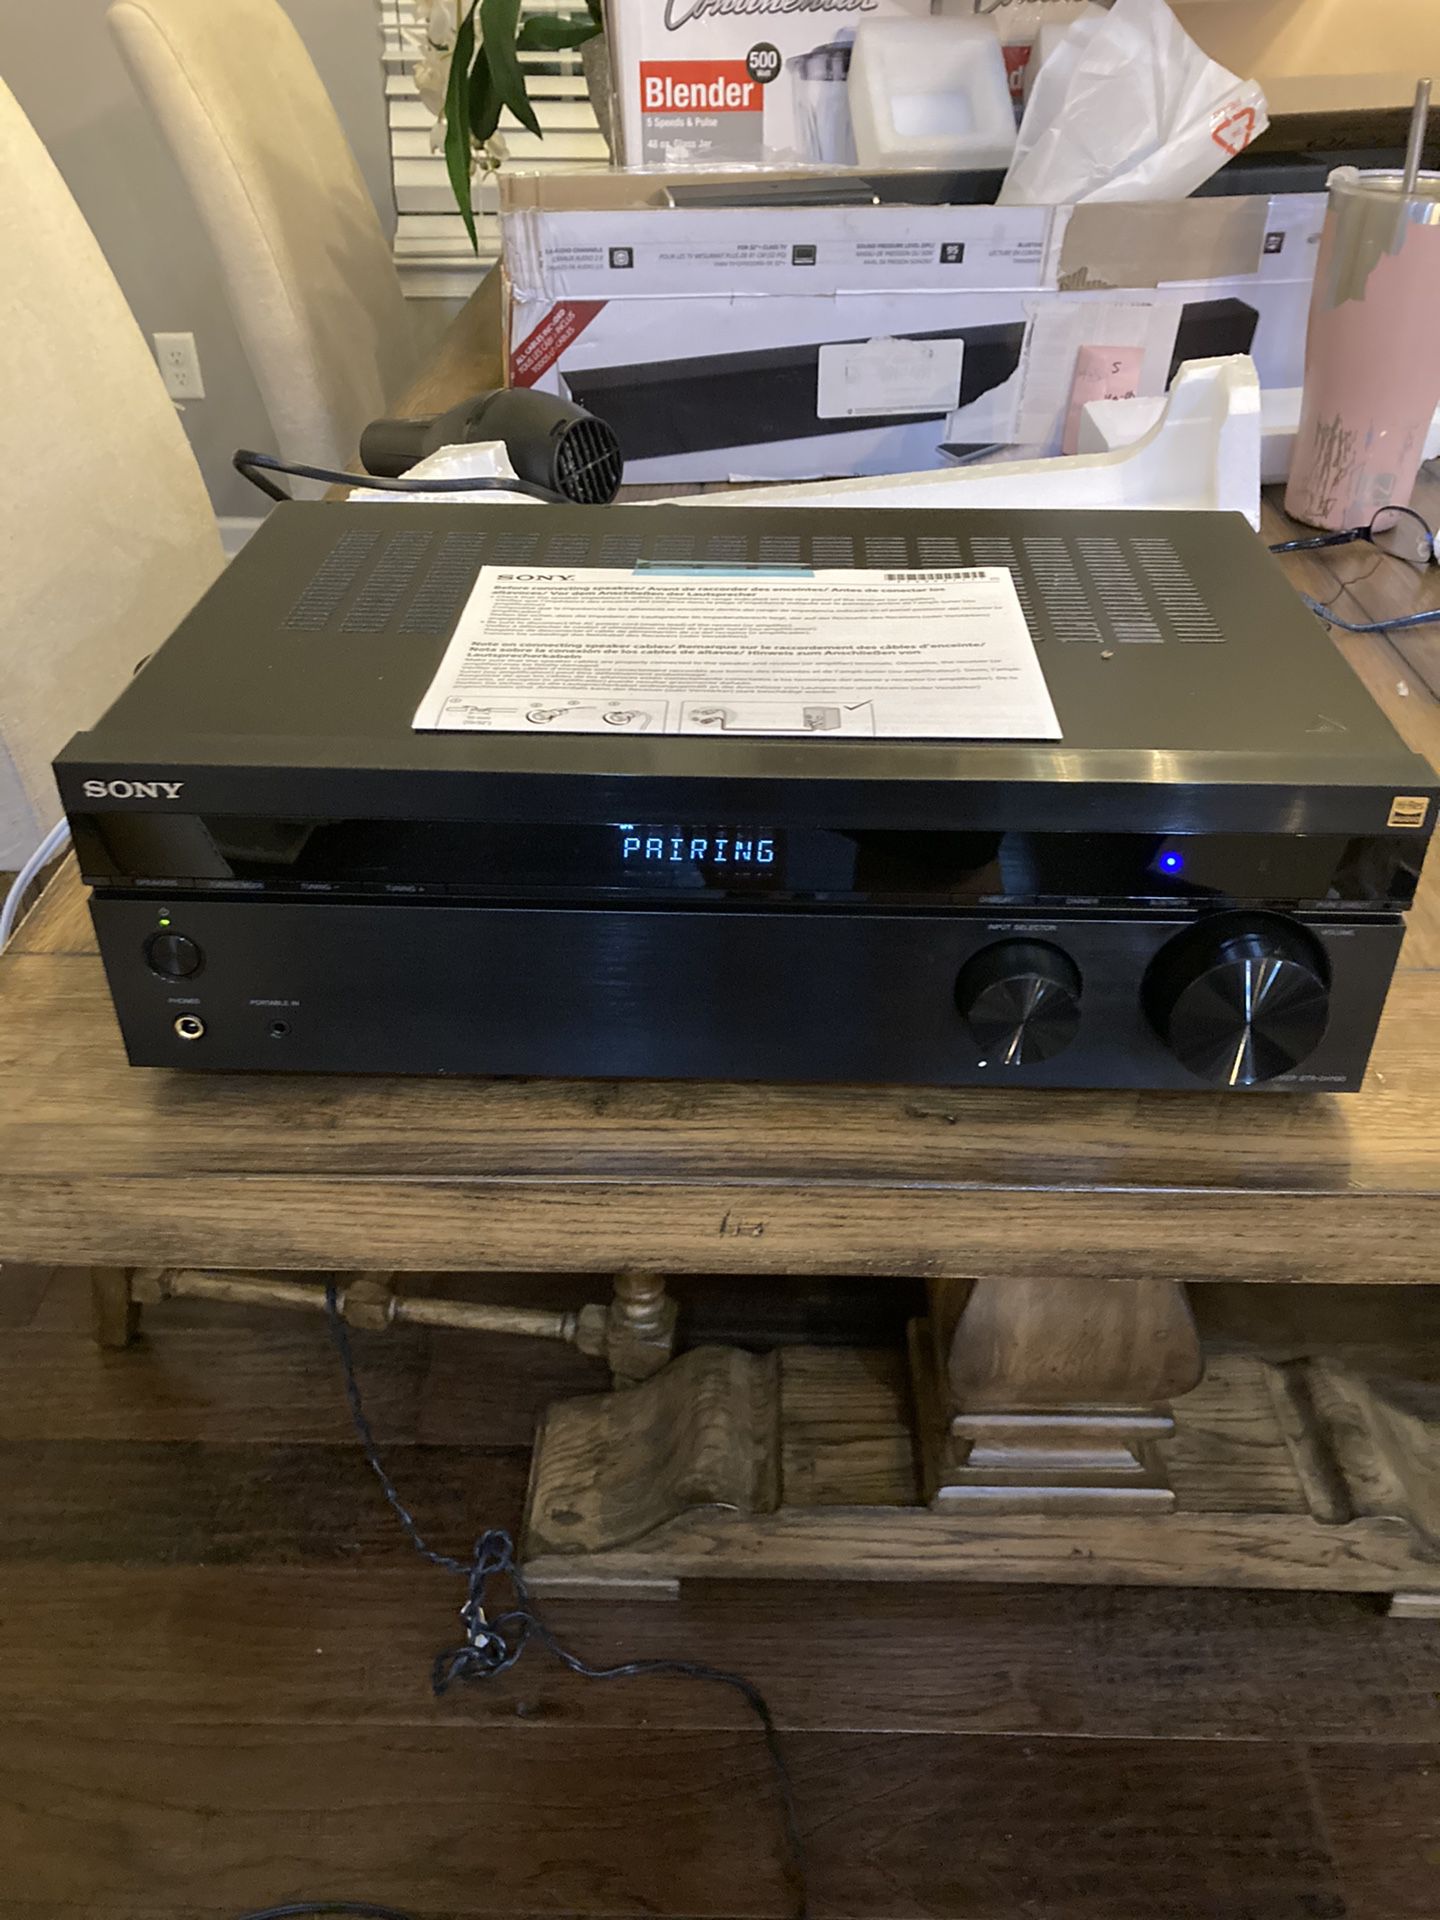 NEW IN BOX SONY STEREO RECEIVER - CHANNEL- BLUETOOTH